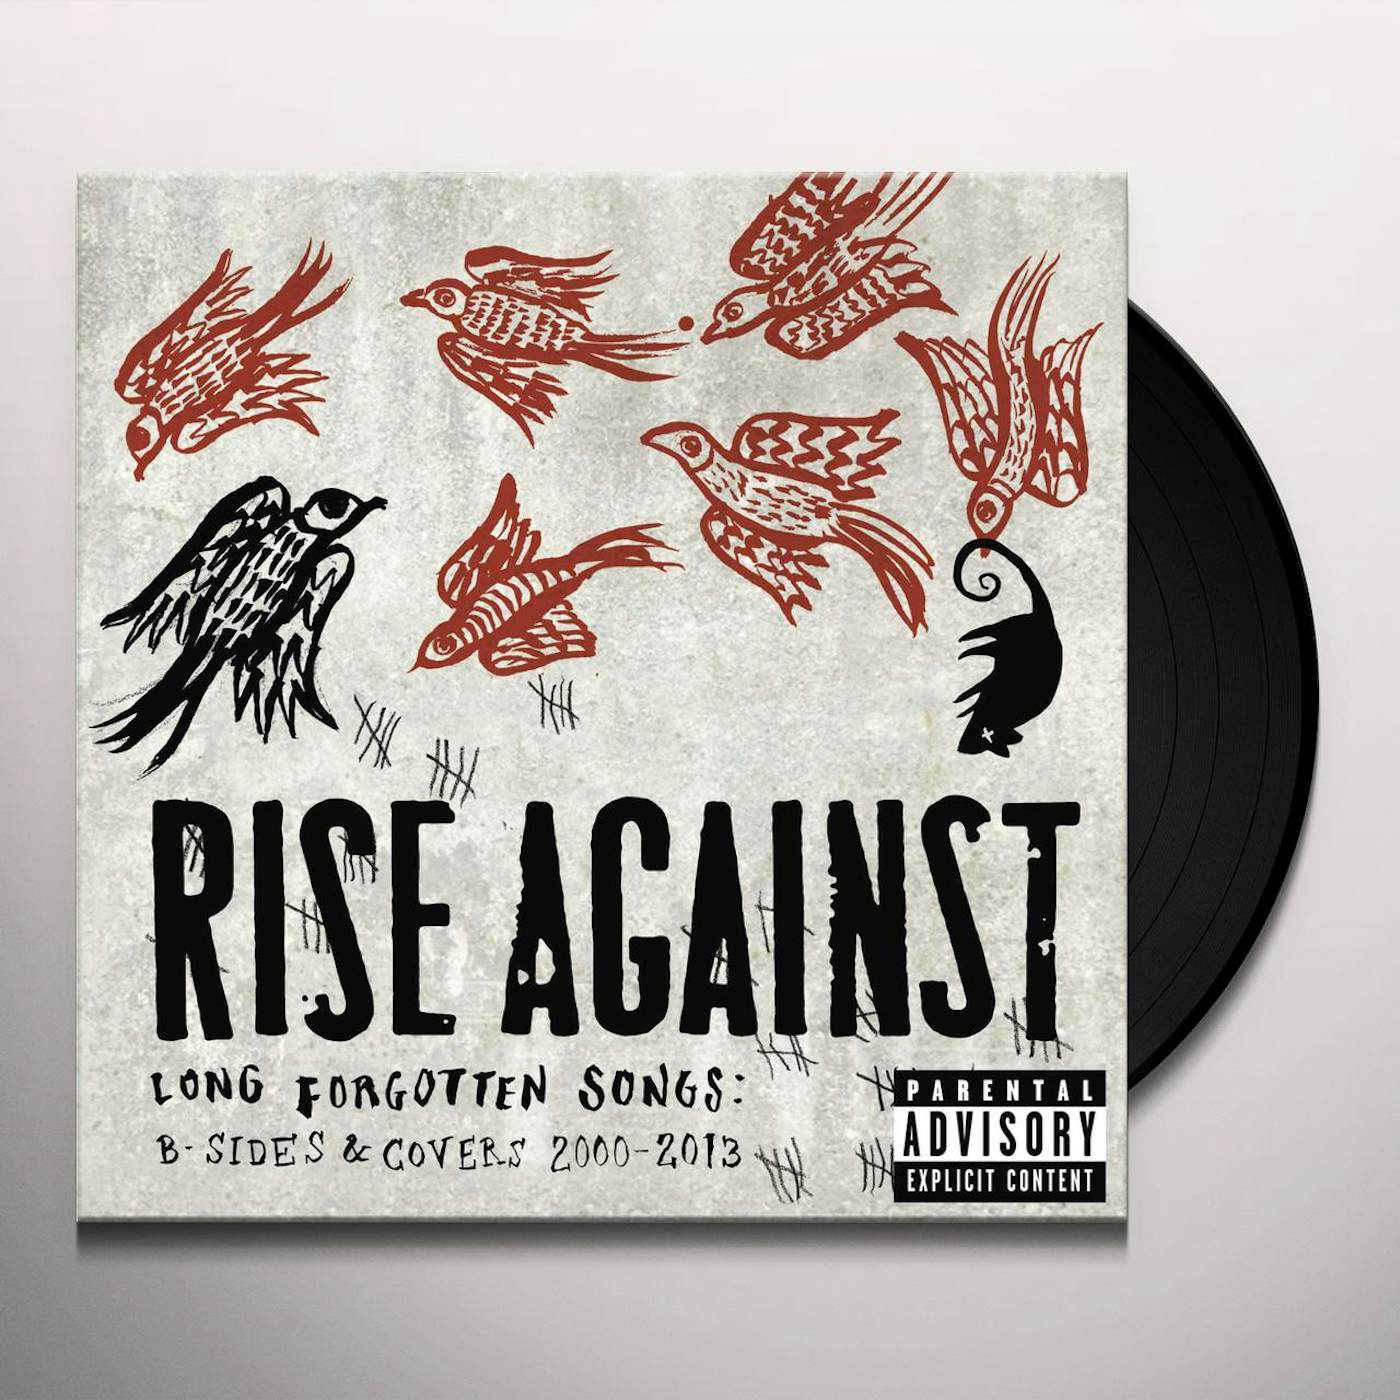 Rise Against Long Forgotten Songs: B-Sides & Covers 2000-2013 Vinyl Record